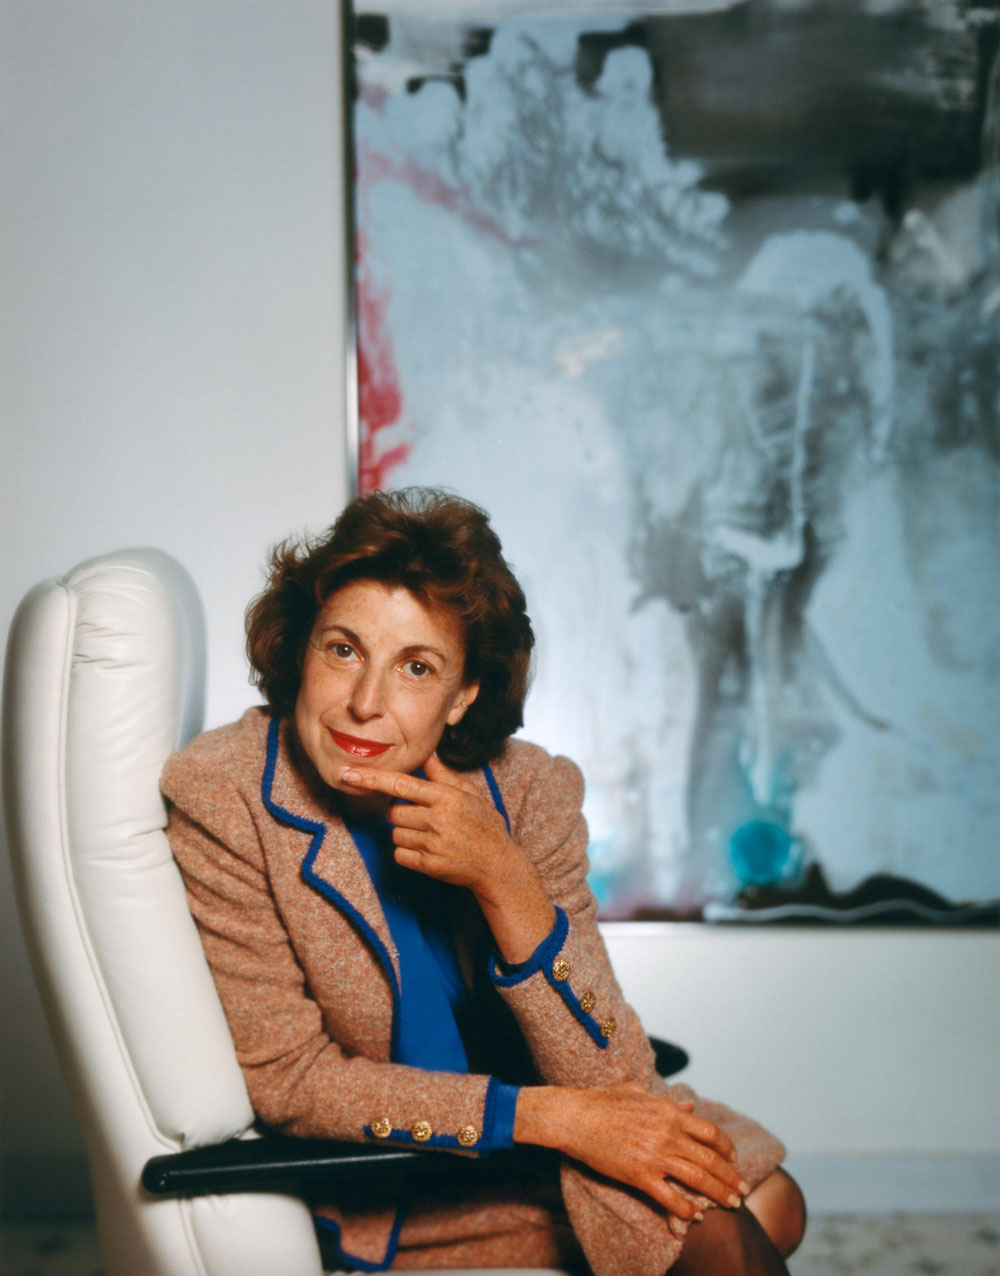 Abstract Expressionist painter Helen Frankenthaler in 1990